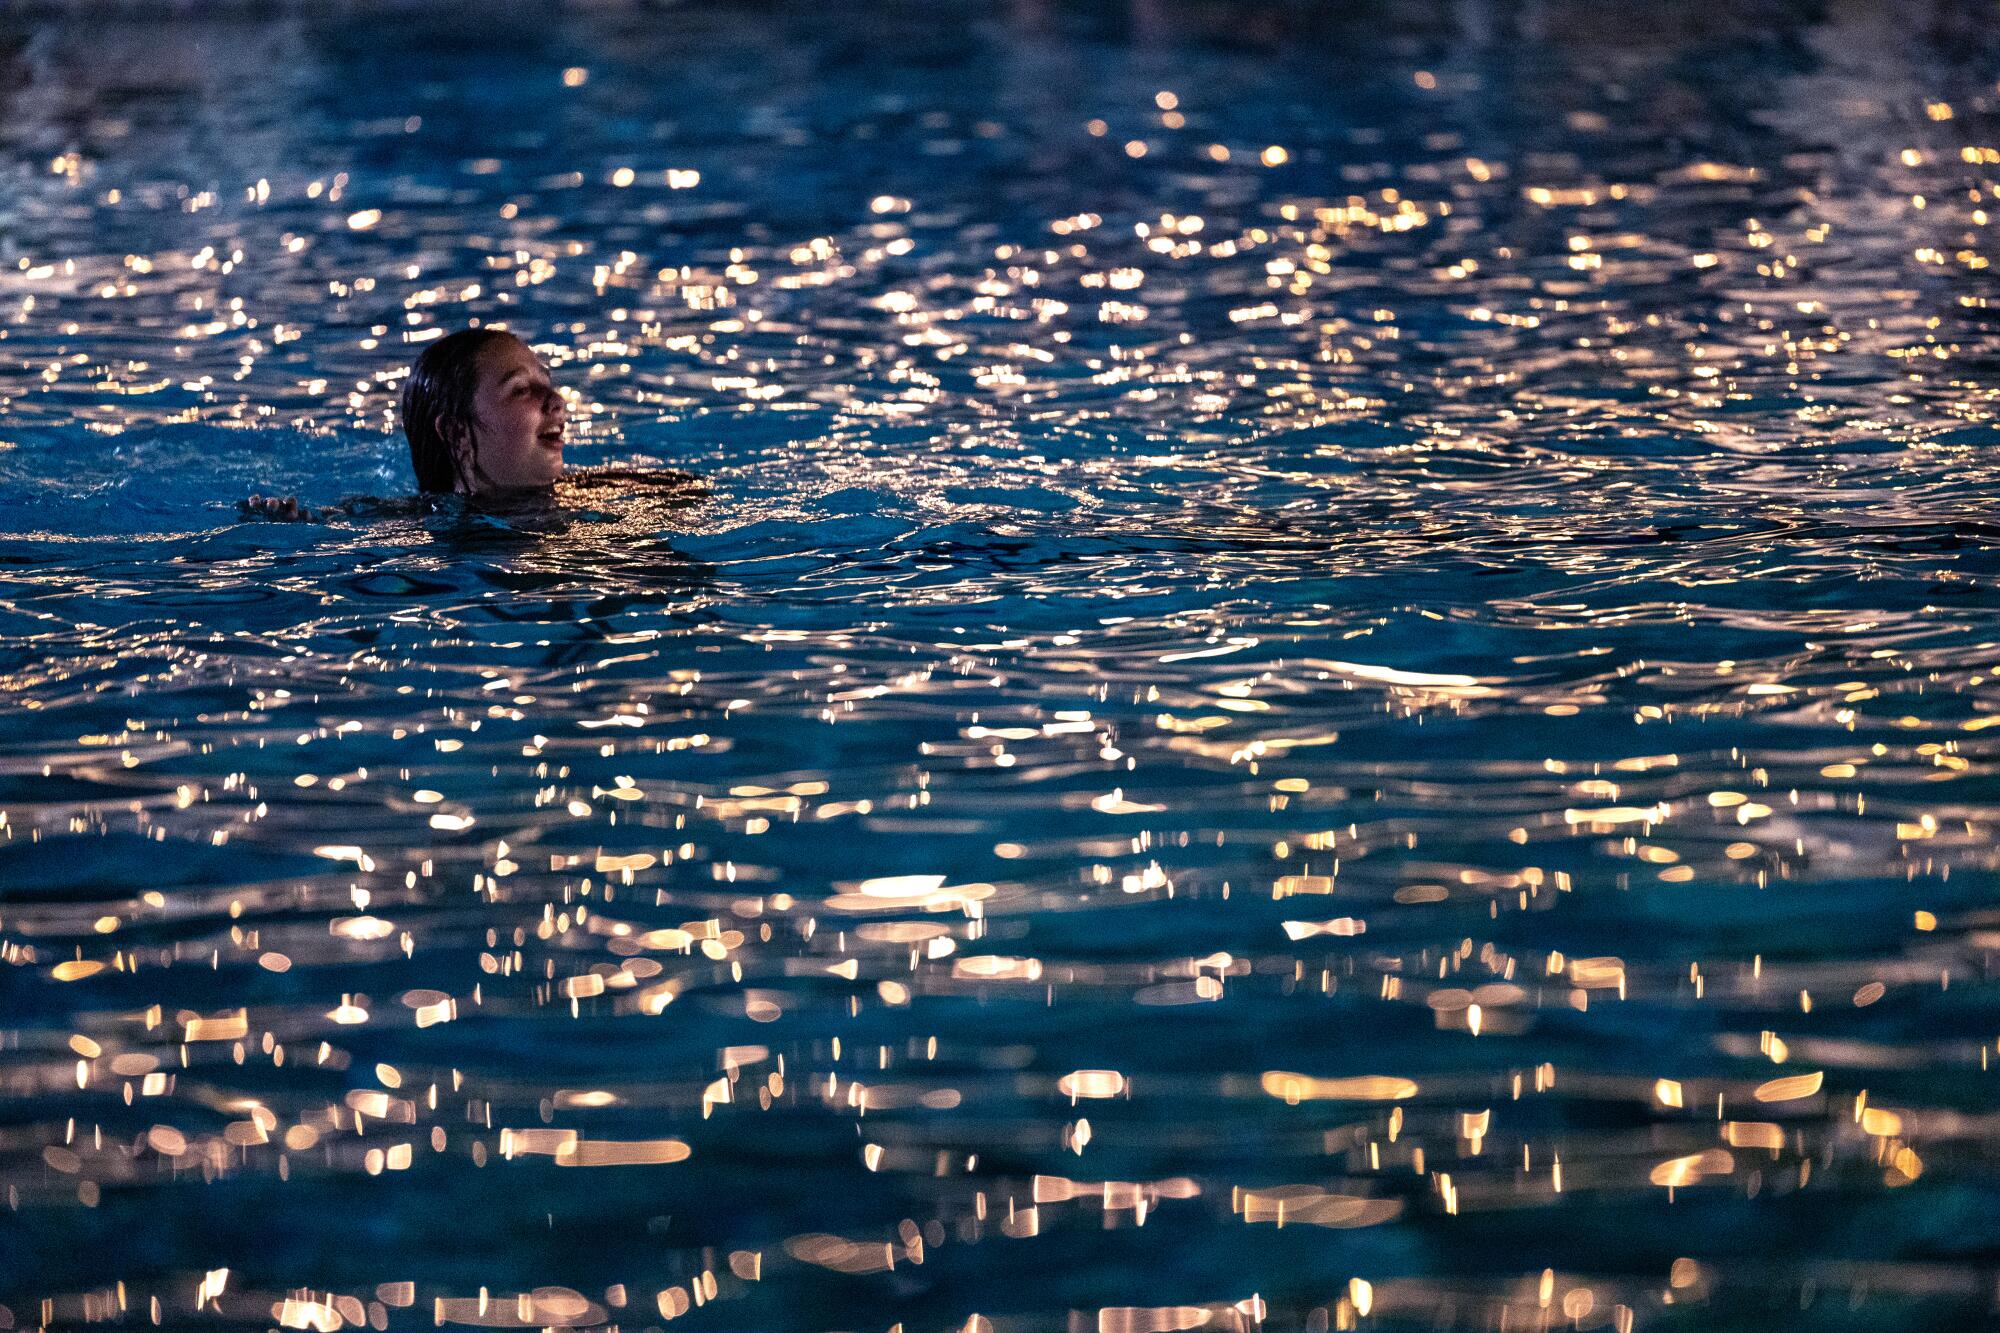 A man swims in a pool at night.